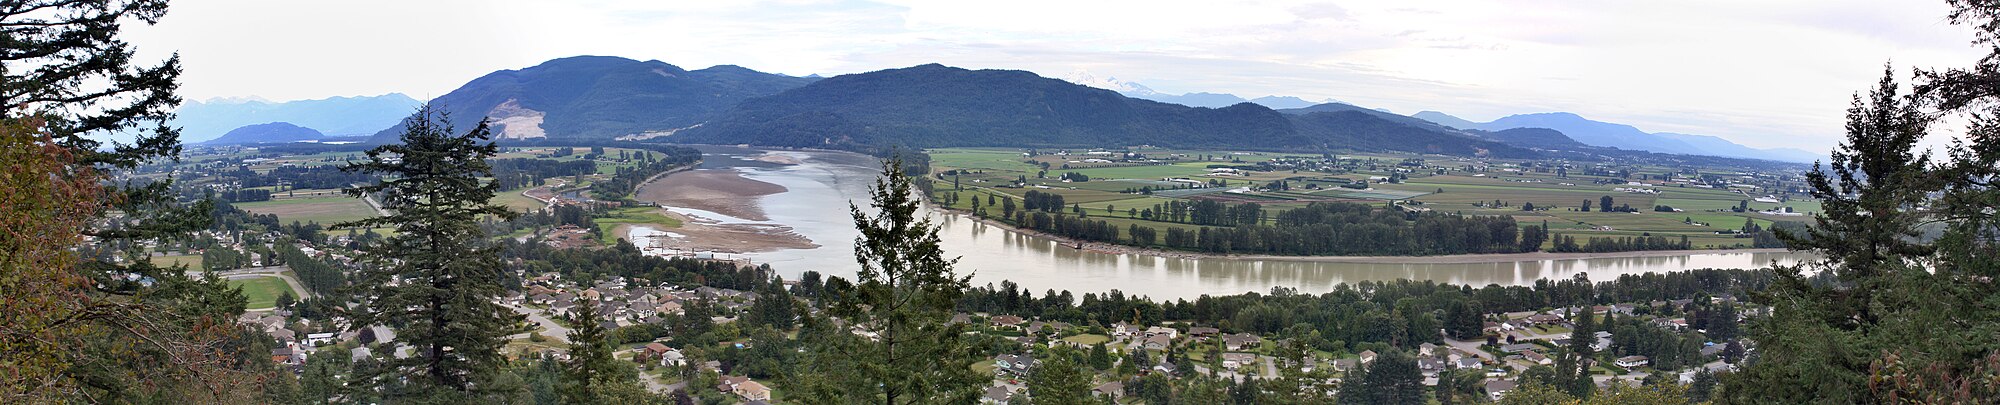 Fraser River as seen from the grounds of Westminster Abbey, above Hatzic in Mission, British Columbia. Sumas Mountain in background.